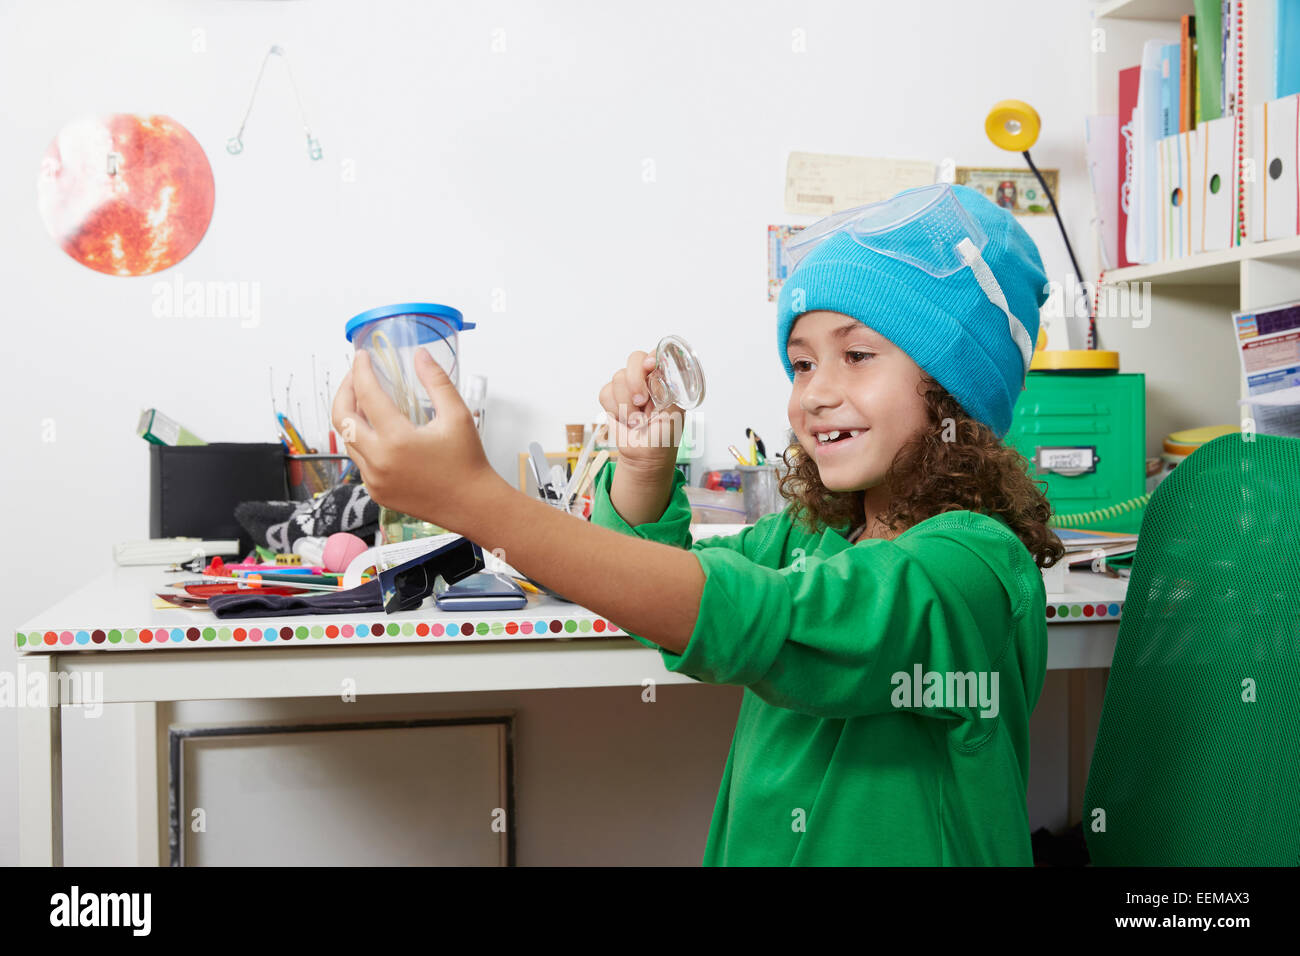 Mixed race girl doing science experiments at desk Stock Photo